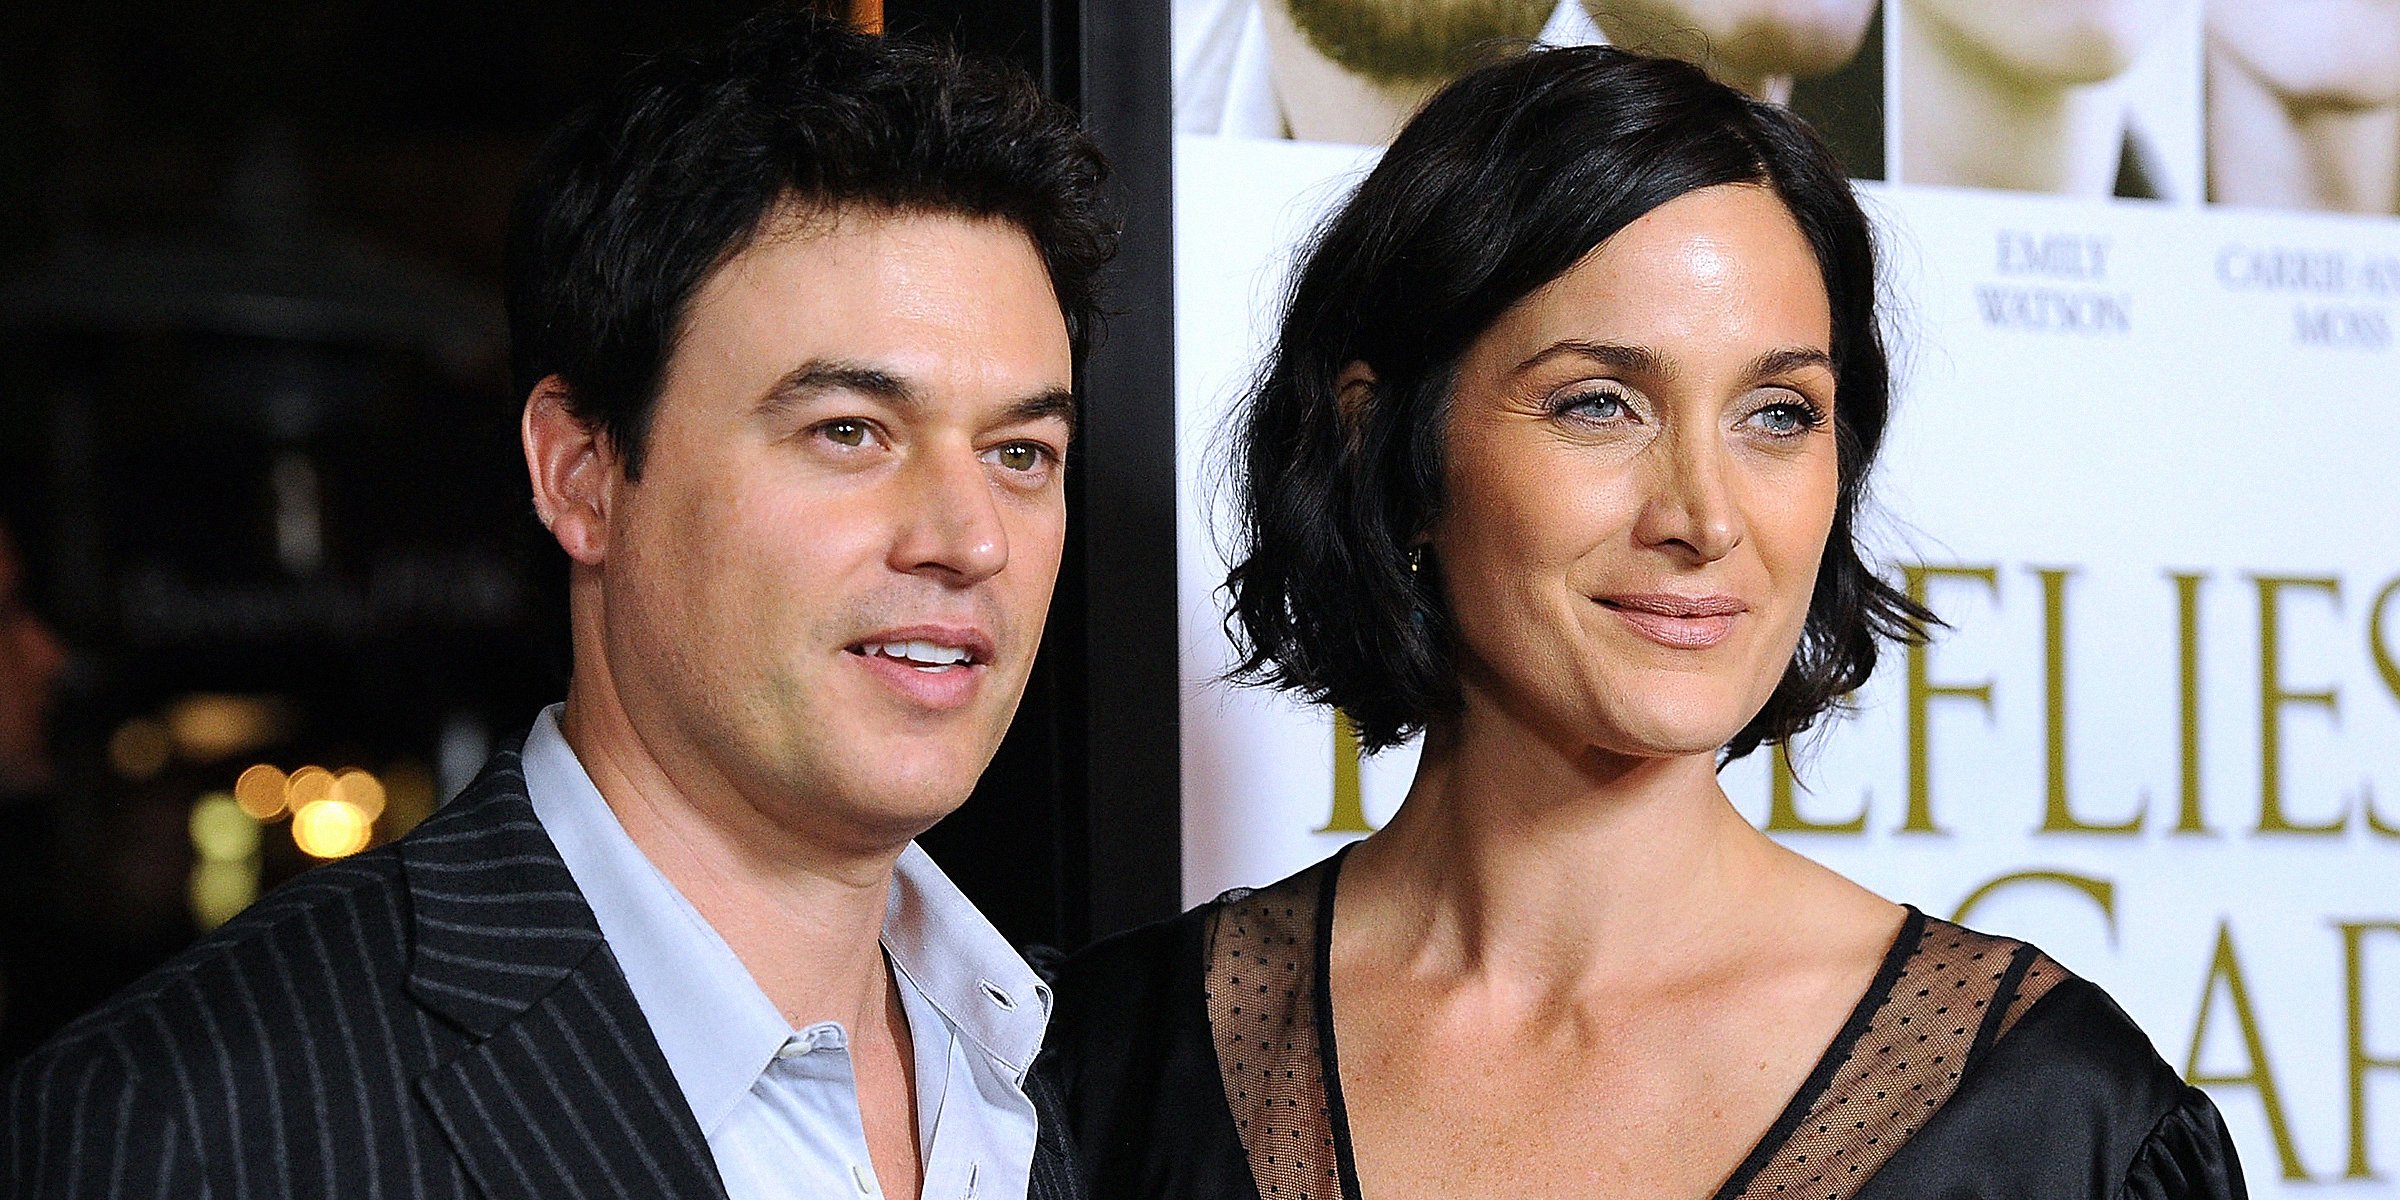 Steven Roy and Carrie-Anne Moss┃Source: Getty Images